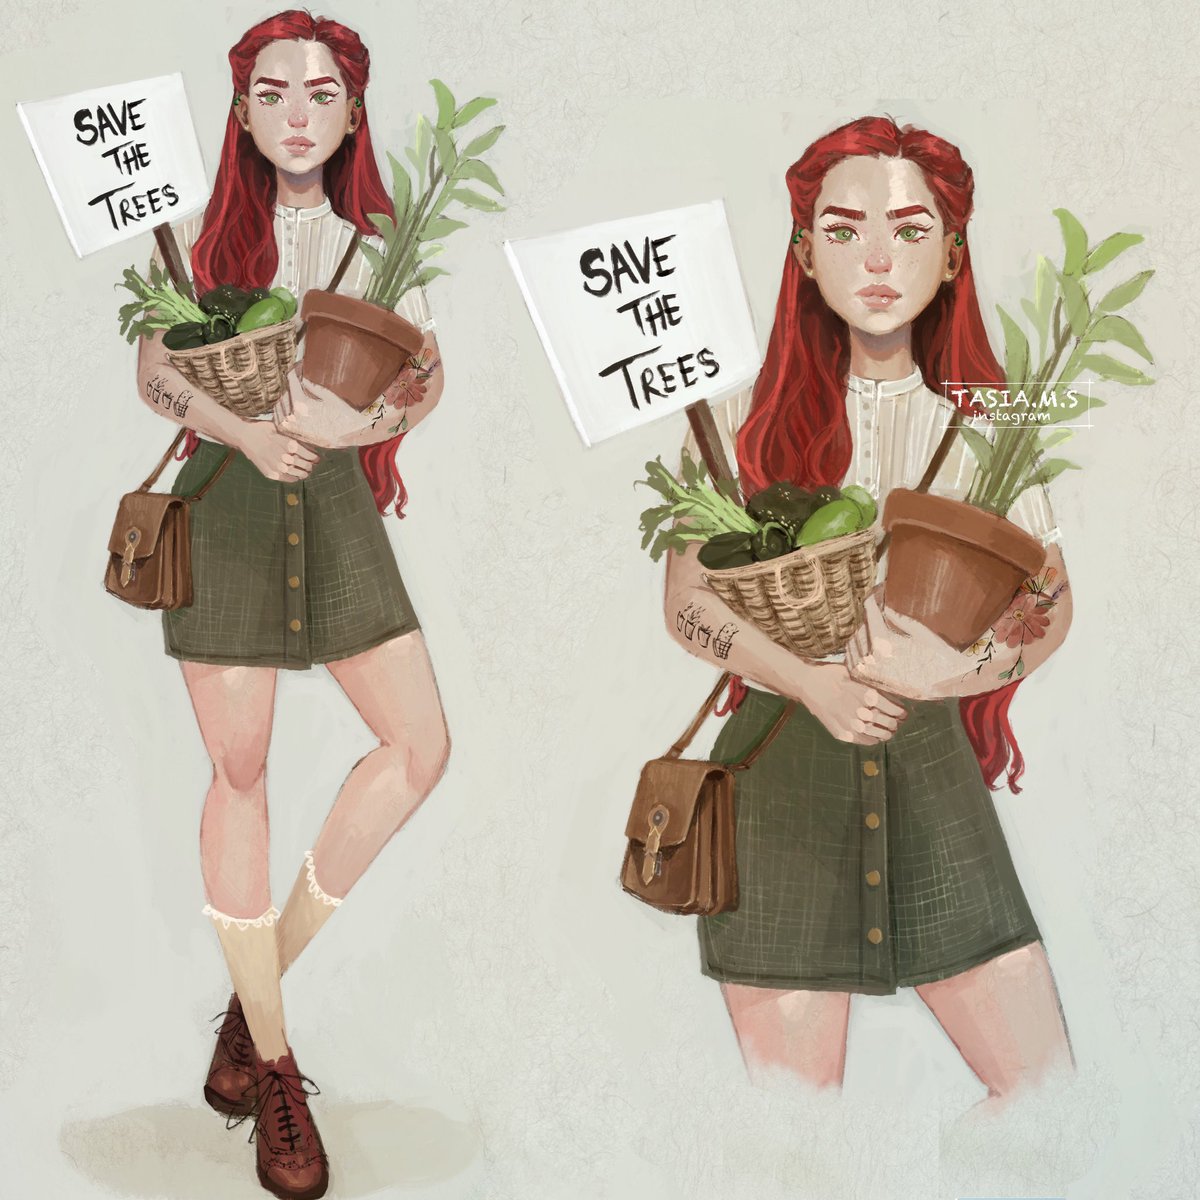 tasia// open for commissions on X: a plant mom🌿 #PoisonIvy https